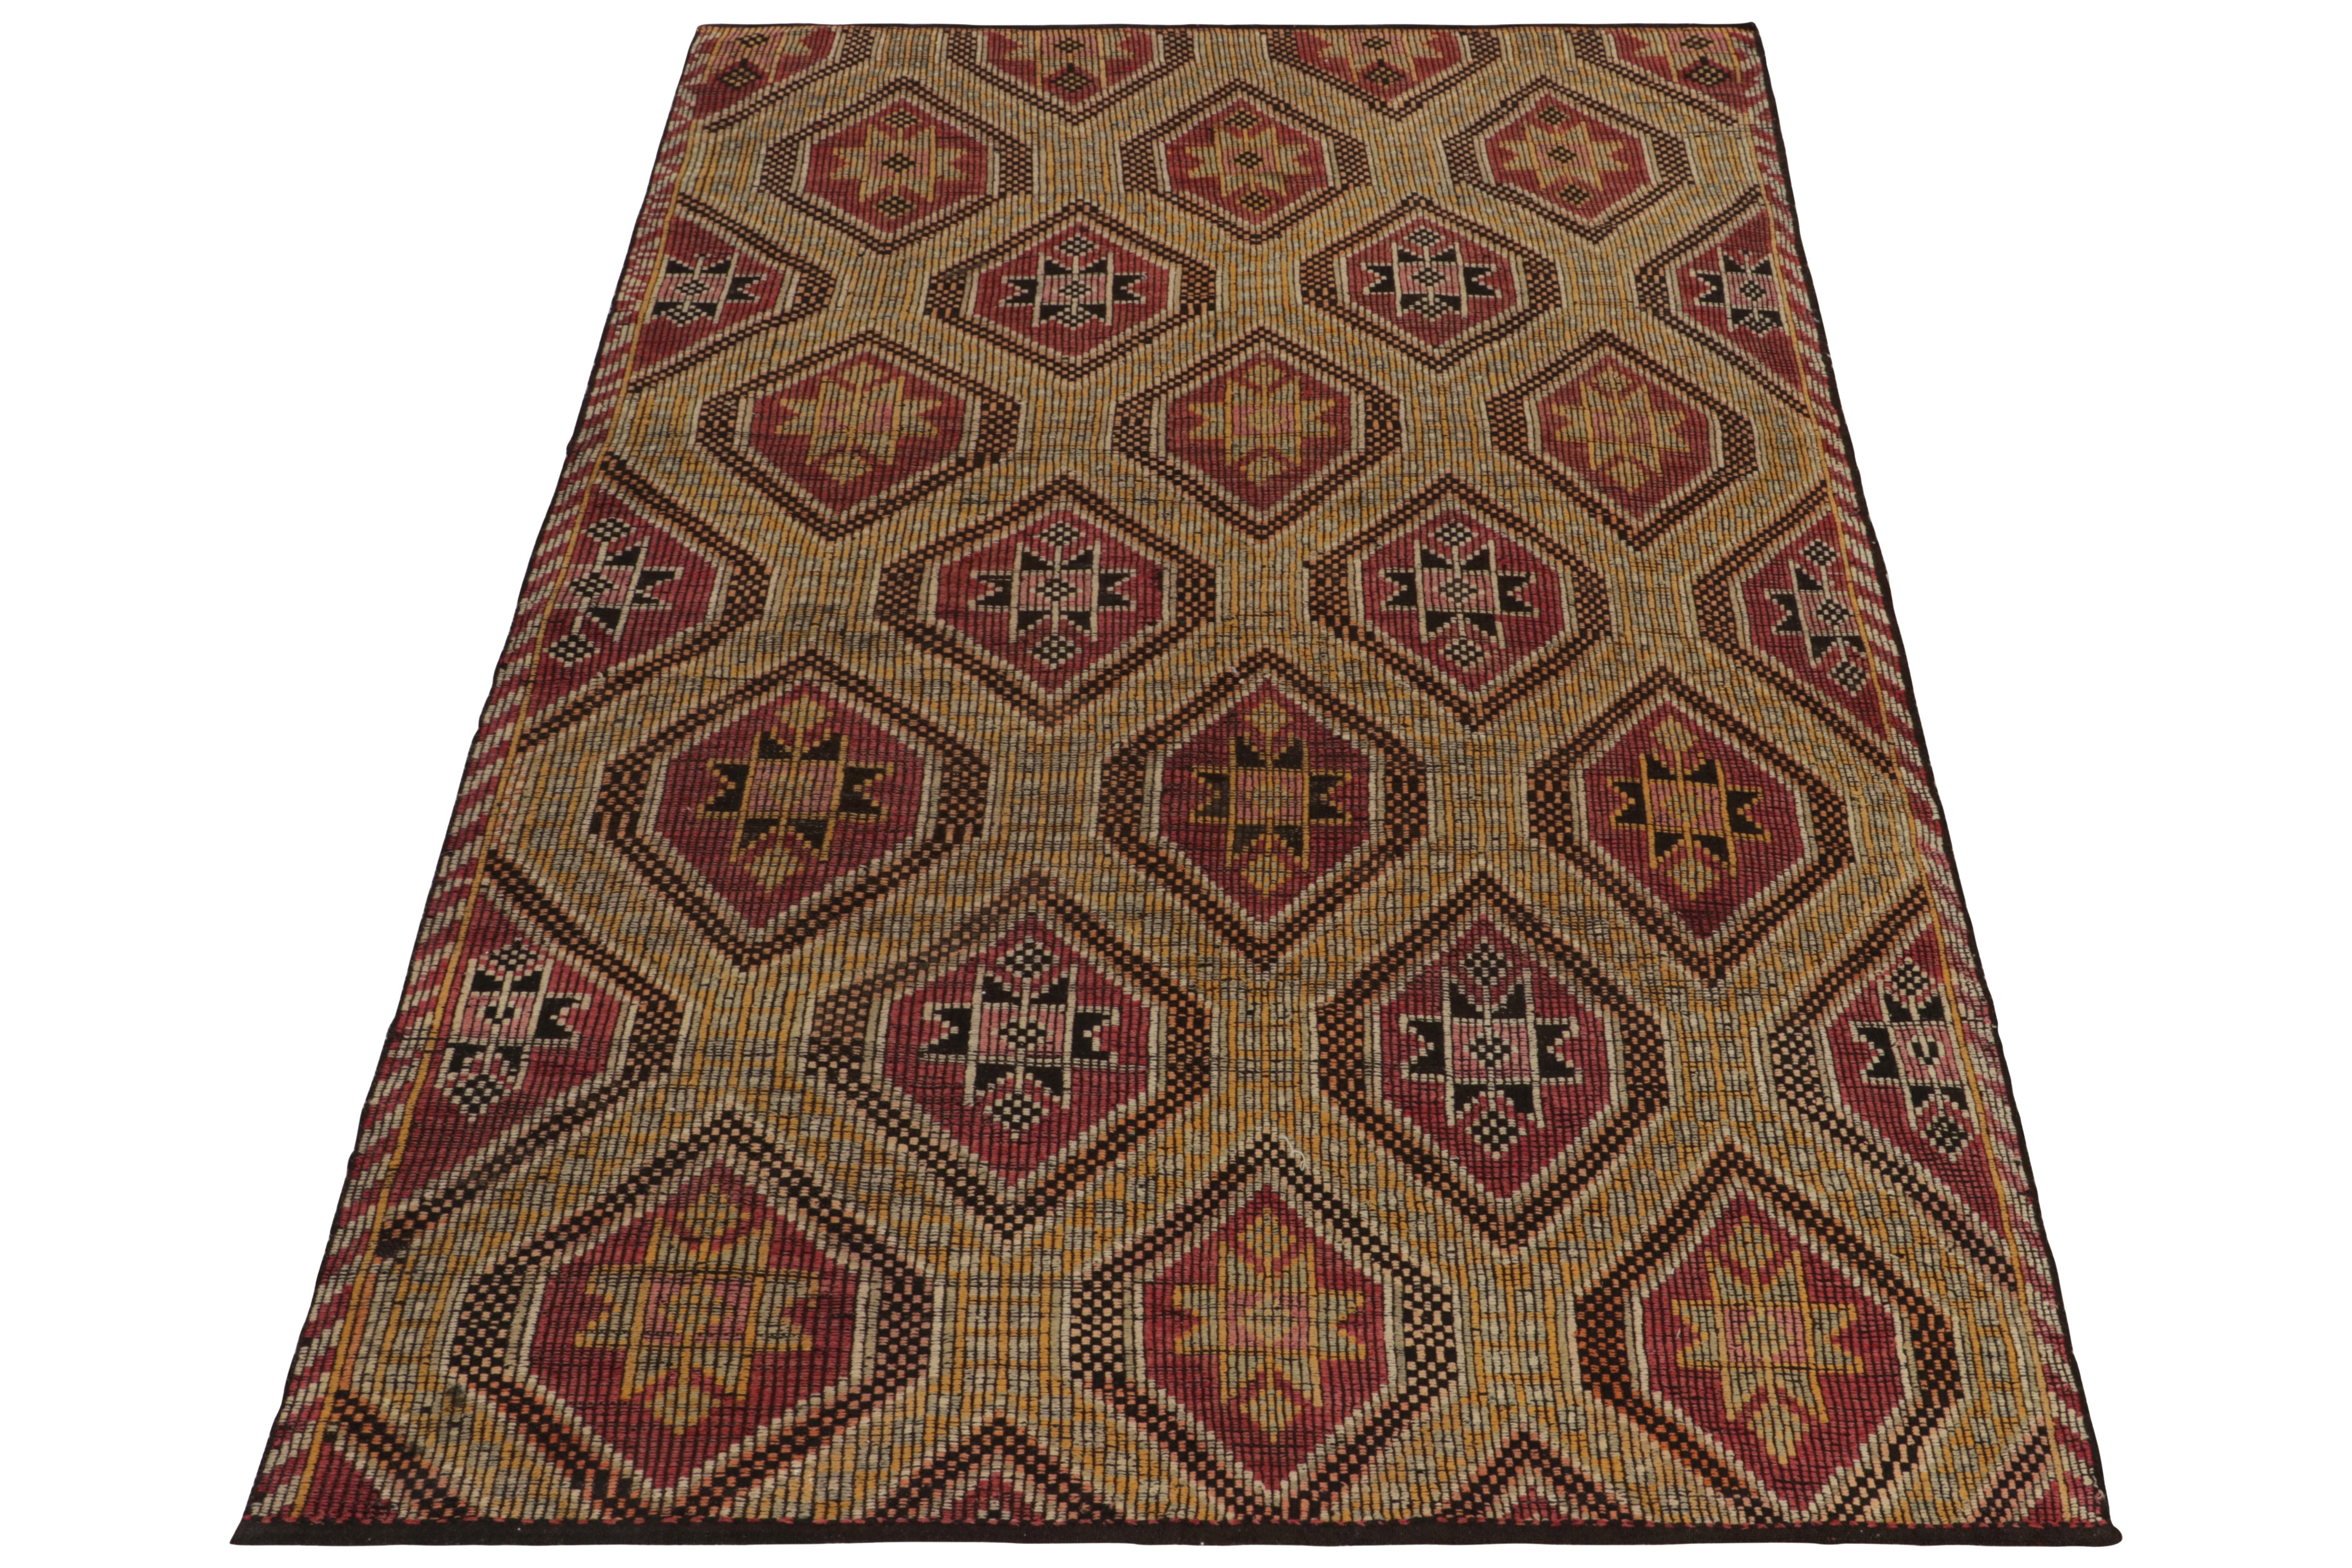 Among the celebrated Kurdish styles, this vintage 6x9 Cecim kilim rug enjoys a special place in our flatweave collection. This particular mid-century rug from Turkey enjoys impeccable embroidery & detailing in rich red, gold & beige-brown with deep